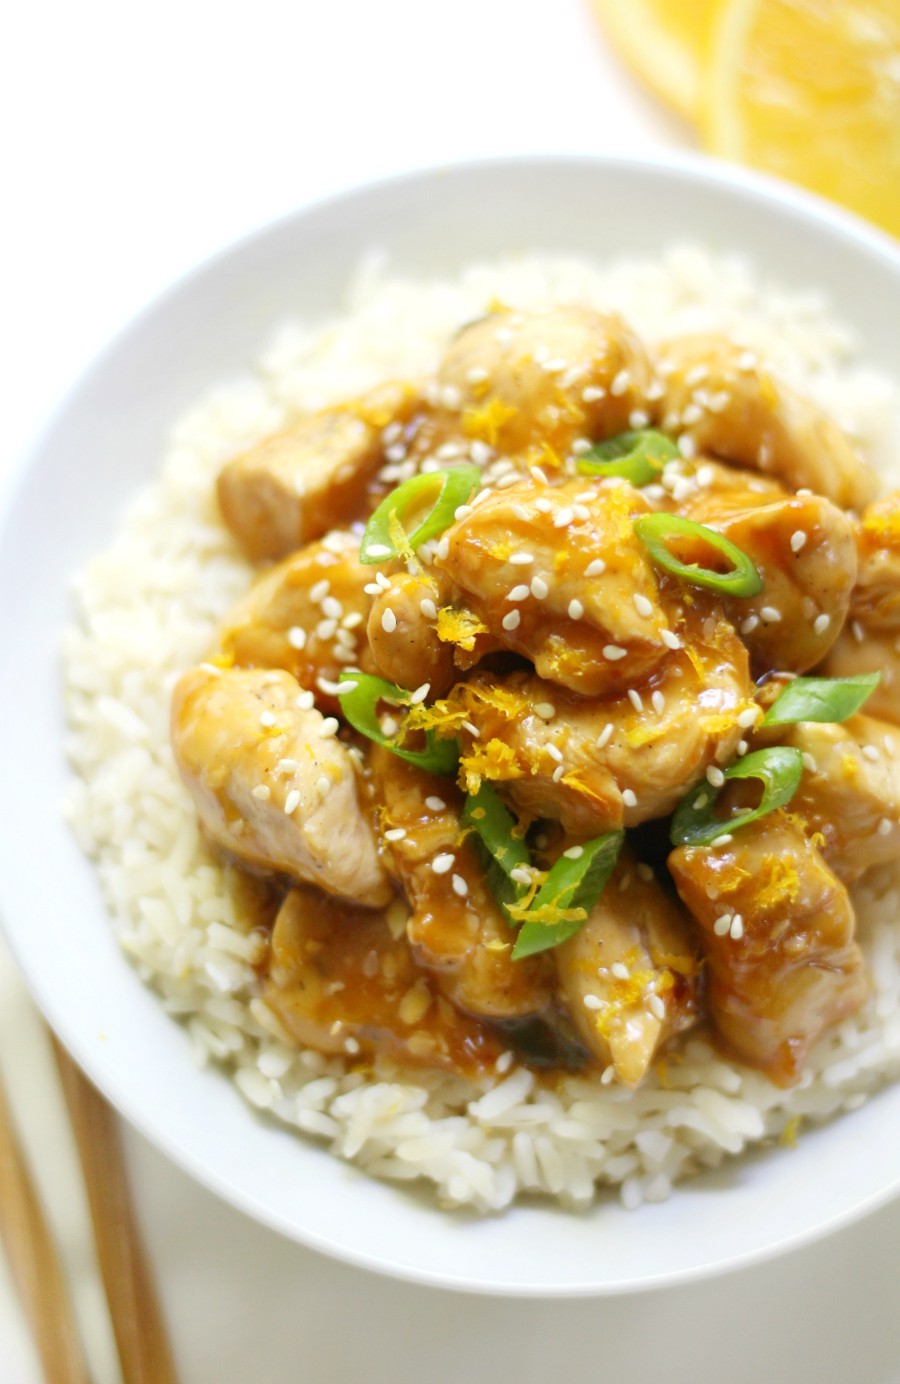 Gluten-Free Orange Chicken (Soy-Free, Top-8 Allergy-Free) | Strength and Sunshine @RebeccaGF666 Easy Chinese take-out made right at home! This Gluten-Free Orange Chicken recipe is not only soy-free, but top-8 allergy-free, quick to make, & a whole lot healthier! With a sticky, sweet, & spicy homemade orange sauce, this remake on the classic take-out will be a new favorite dinner option (with killer leftovers!) #orangechicken #chicken #takeout #glutenfree #soyfree #nutfree #chinesefood